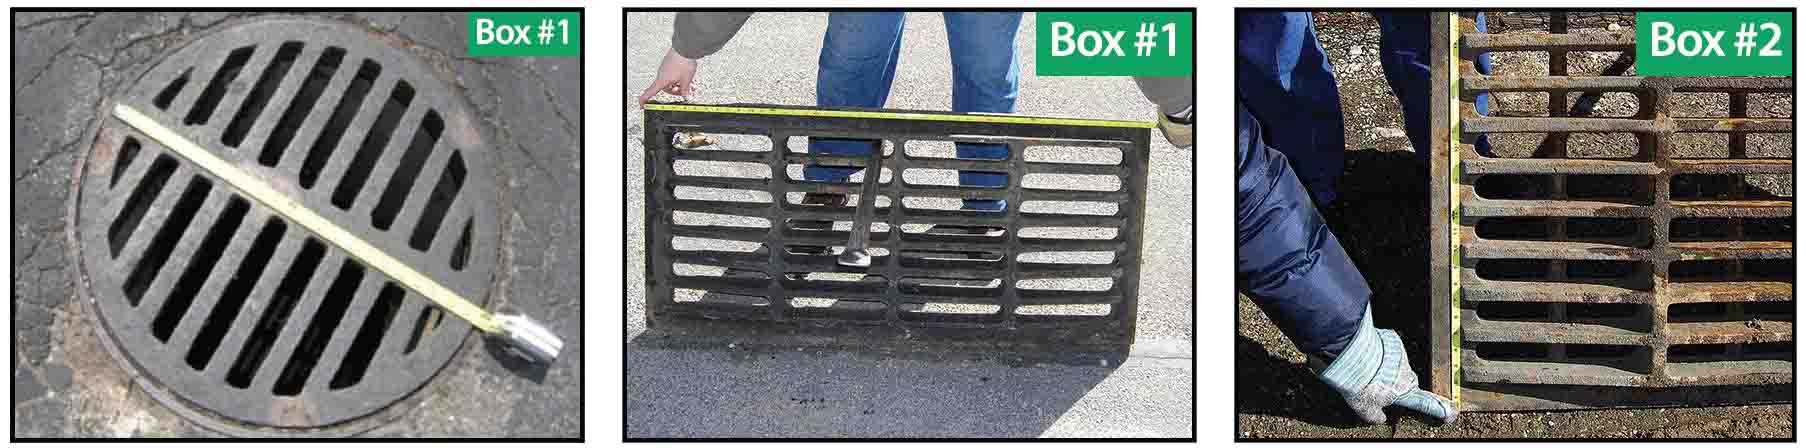 grate inlet survey guide rectangular and round grates